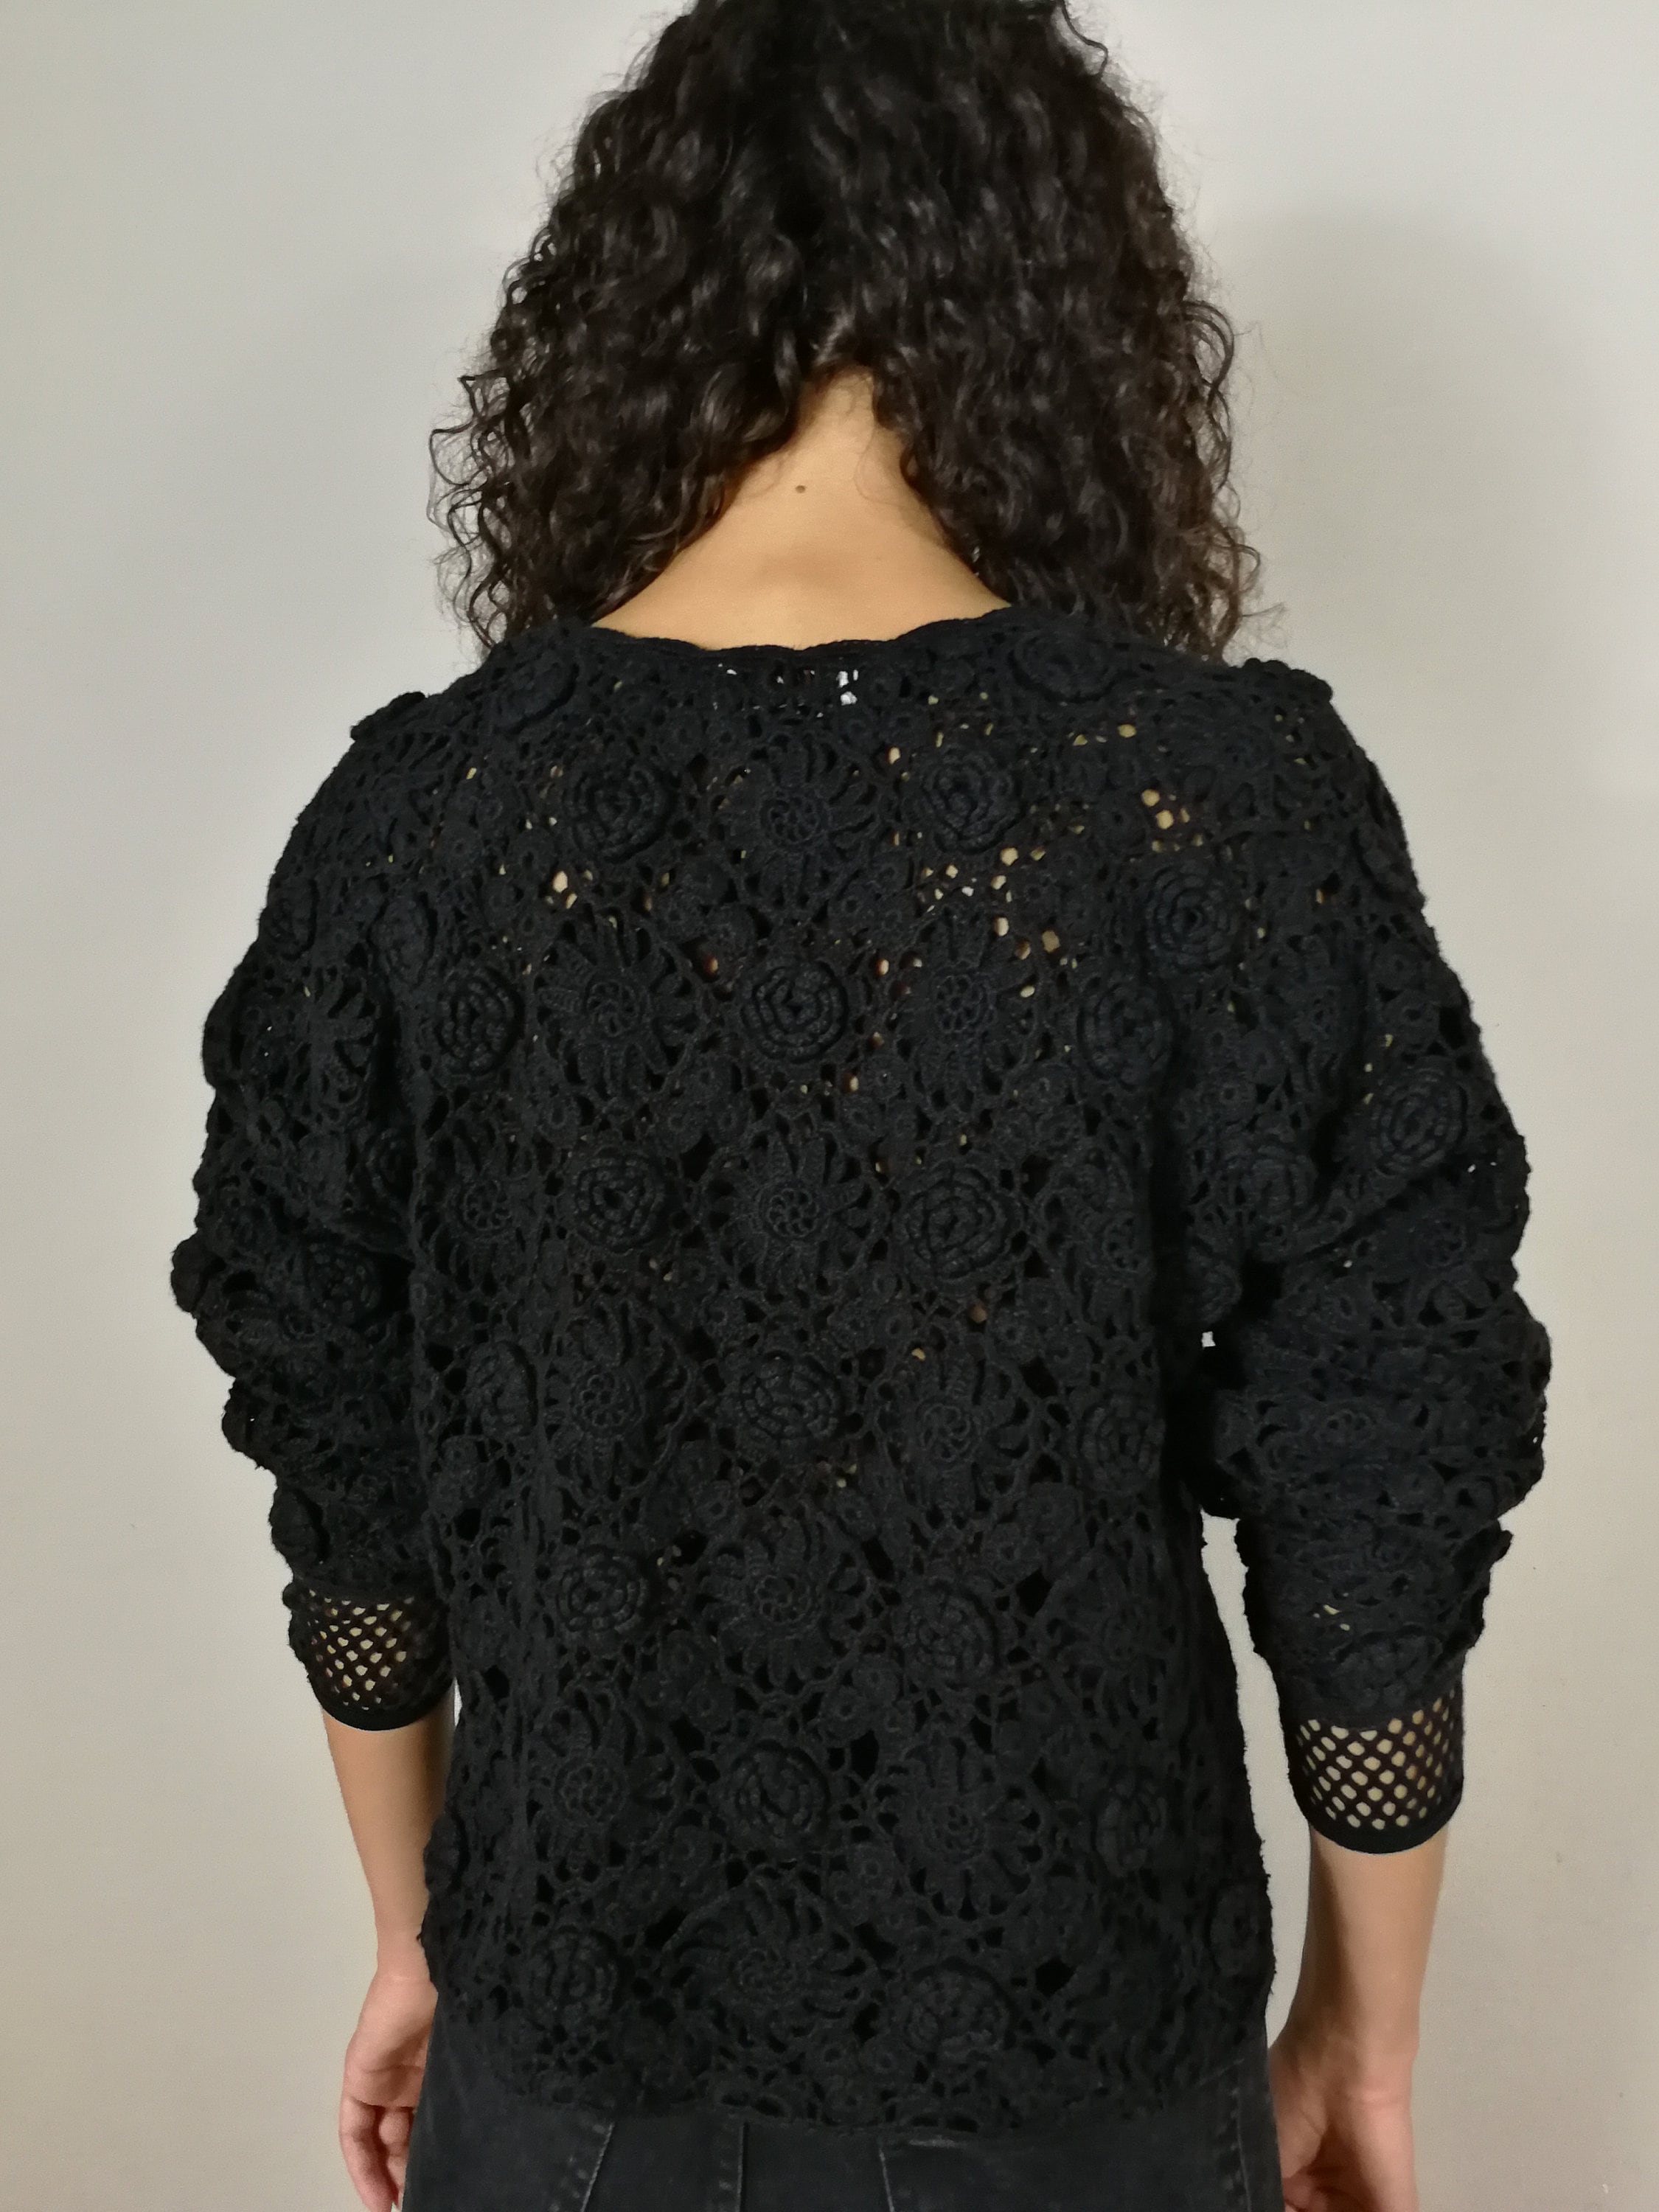 Black cotton lace knitwear jumper from the 90s